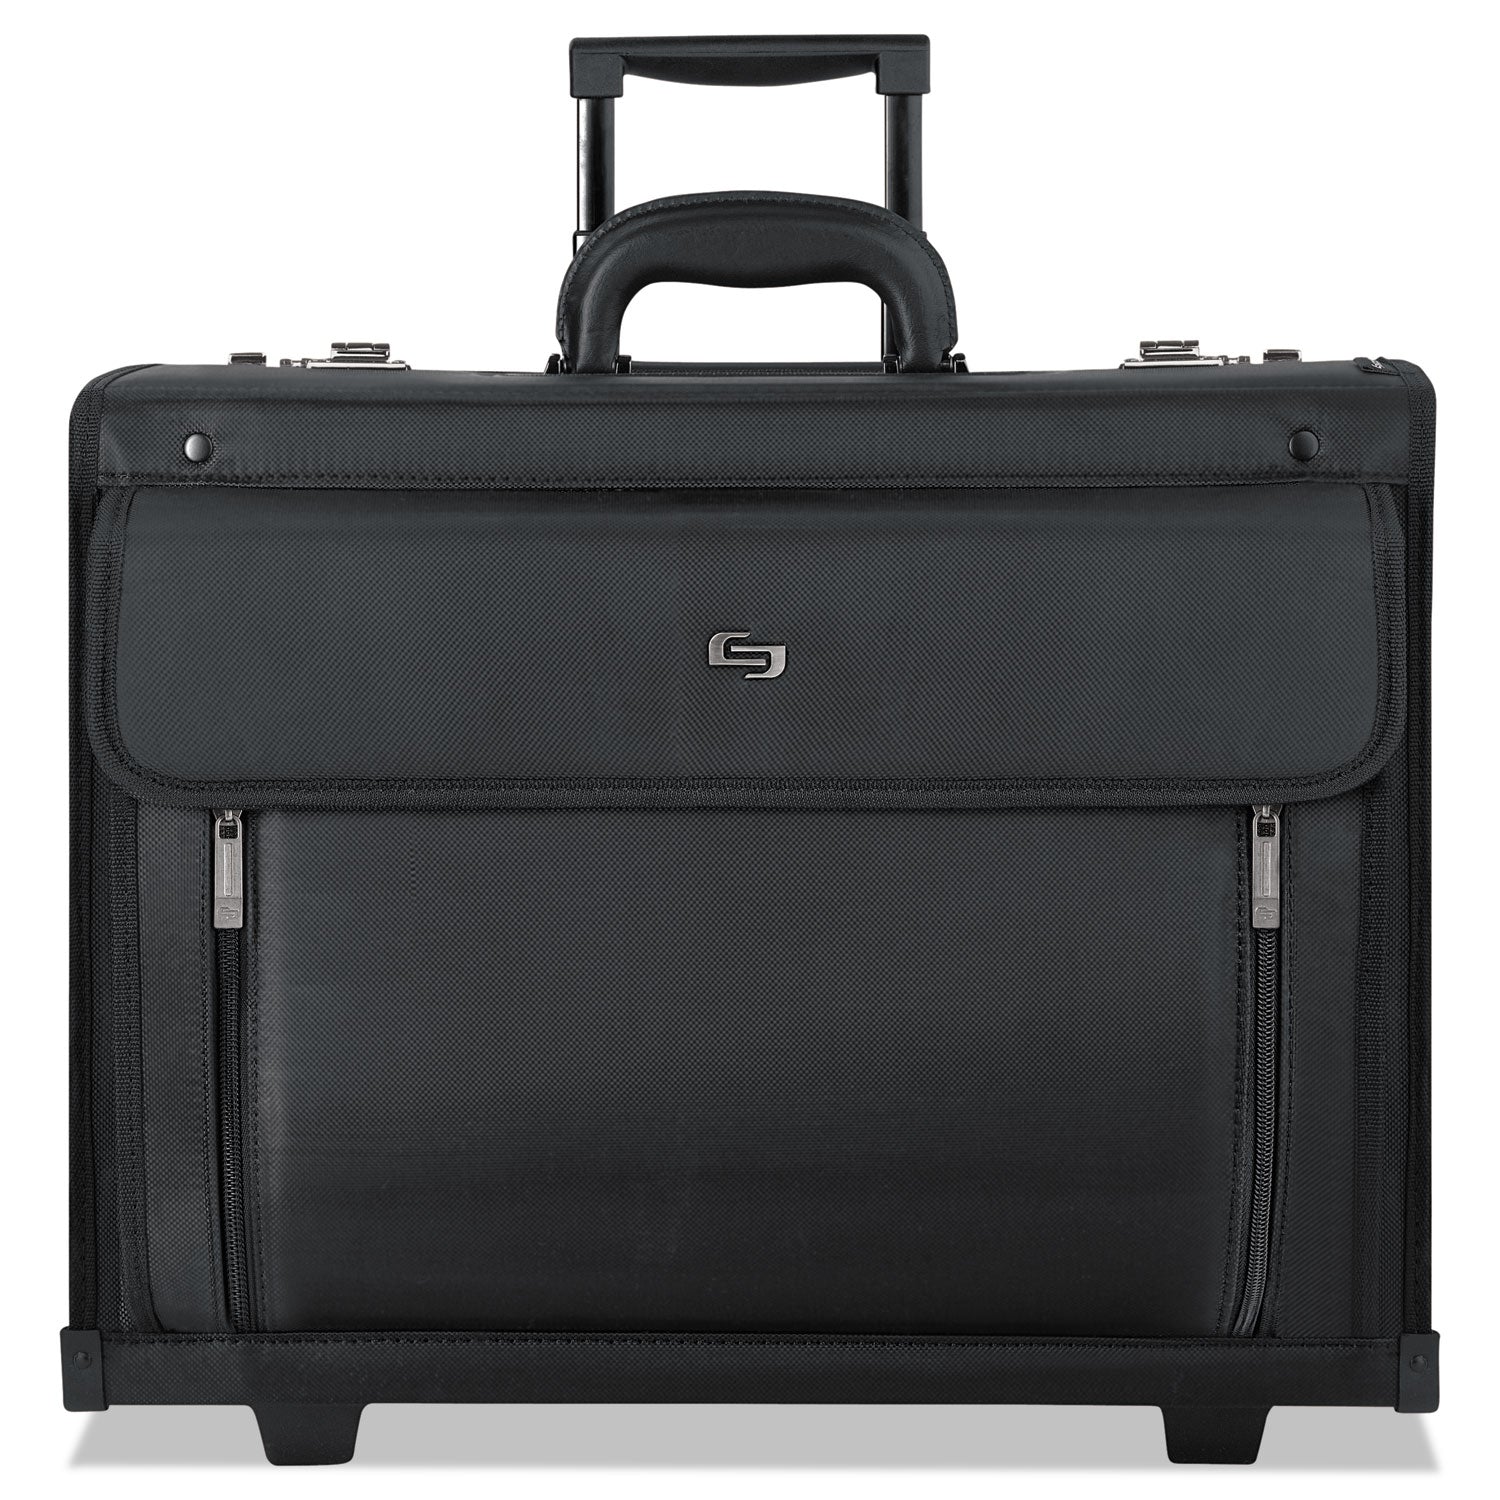 Classic Rolling Catalog Case, Fits Devices Up to 16", Polyester, 18 x 8 x 14, Black - 